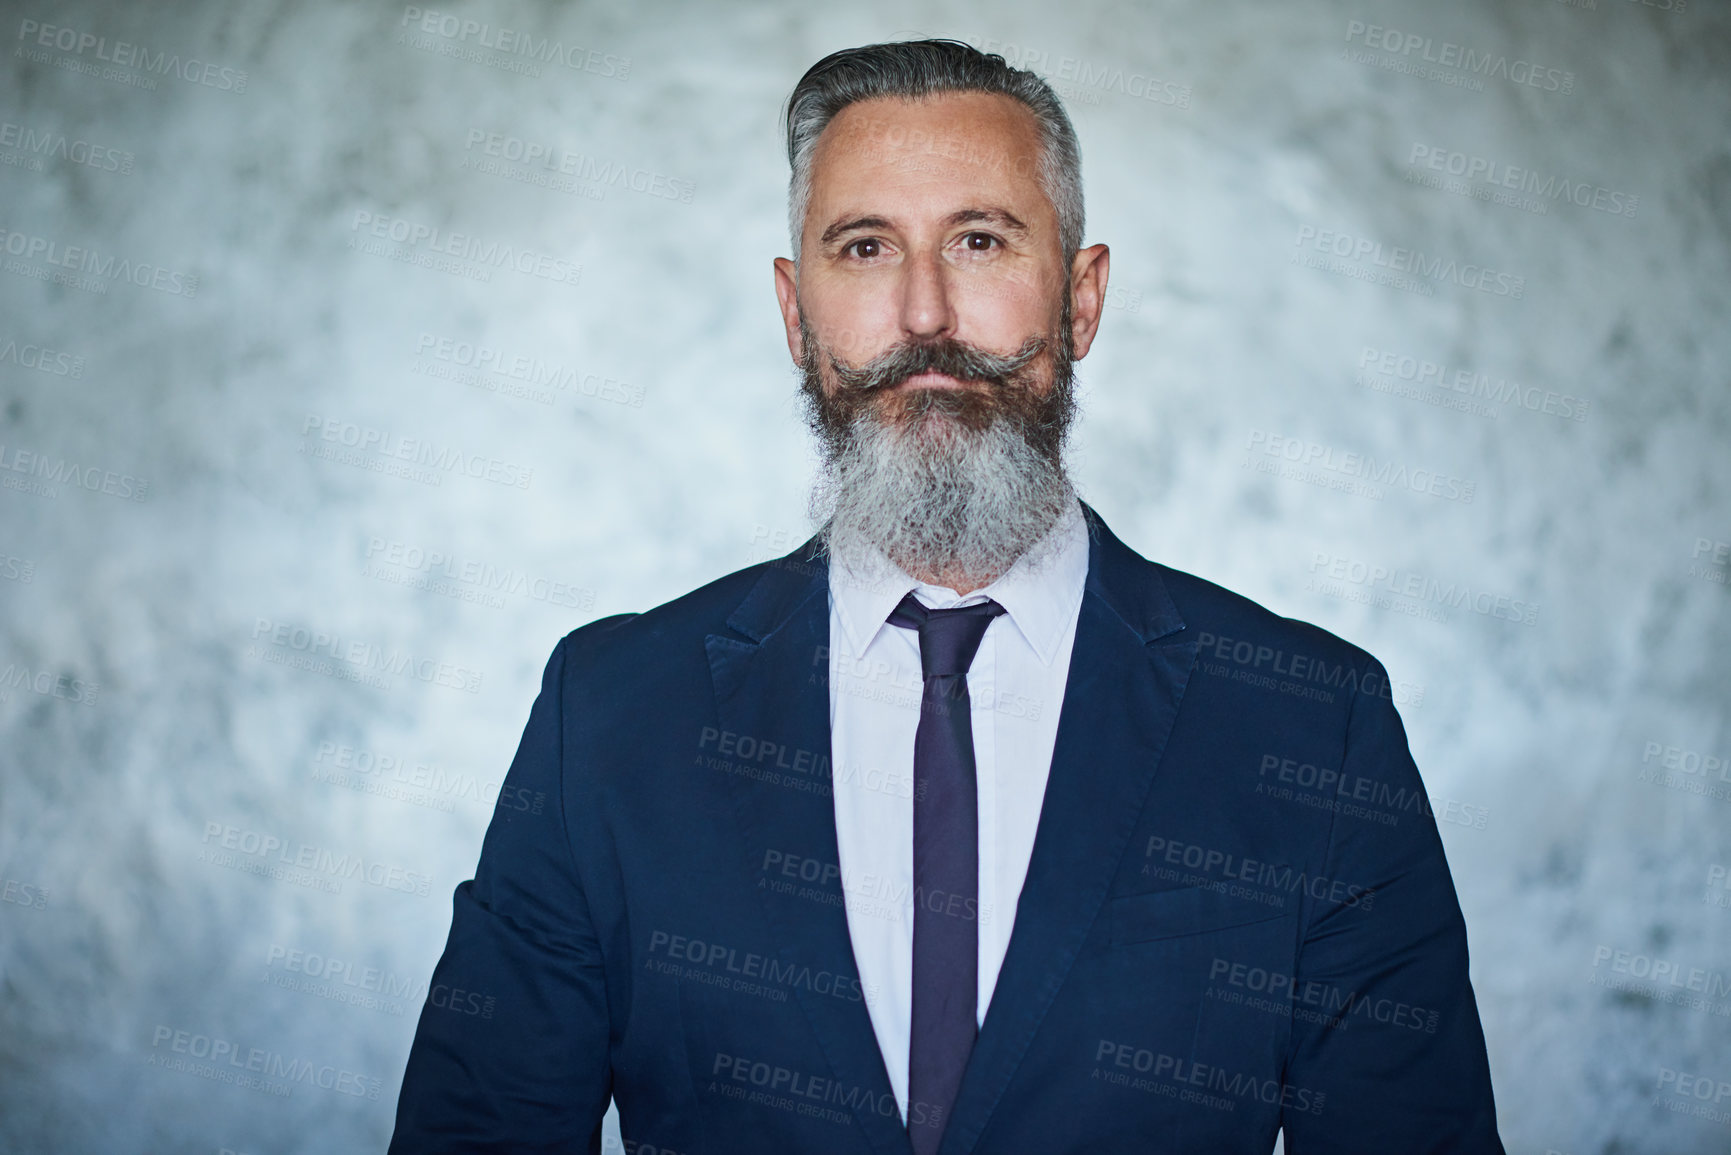 Buy stock photo Portrait of a handsome middle aged businessman wearing a formal suit while standing against a grey background